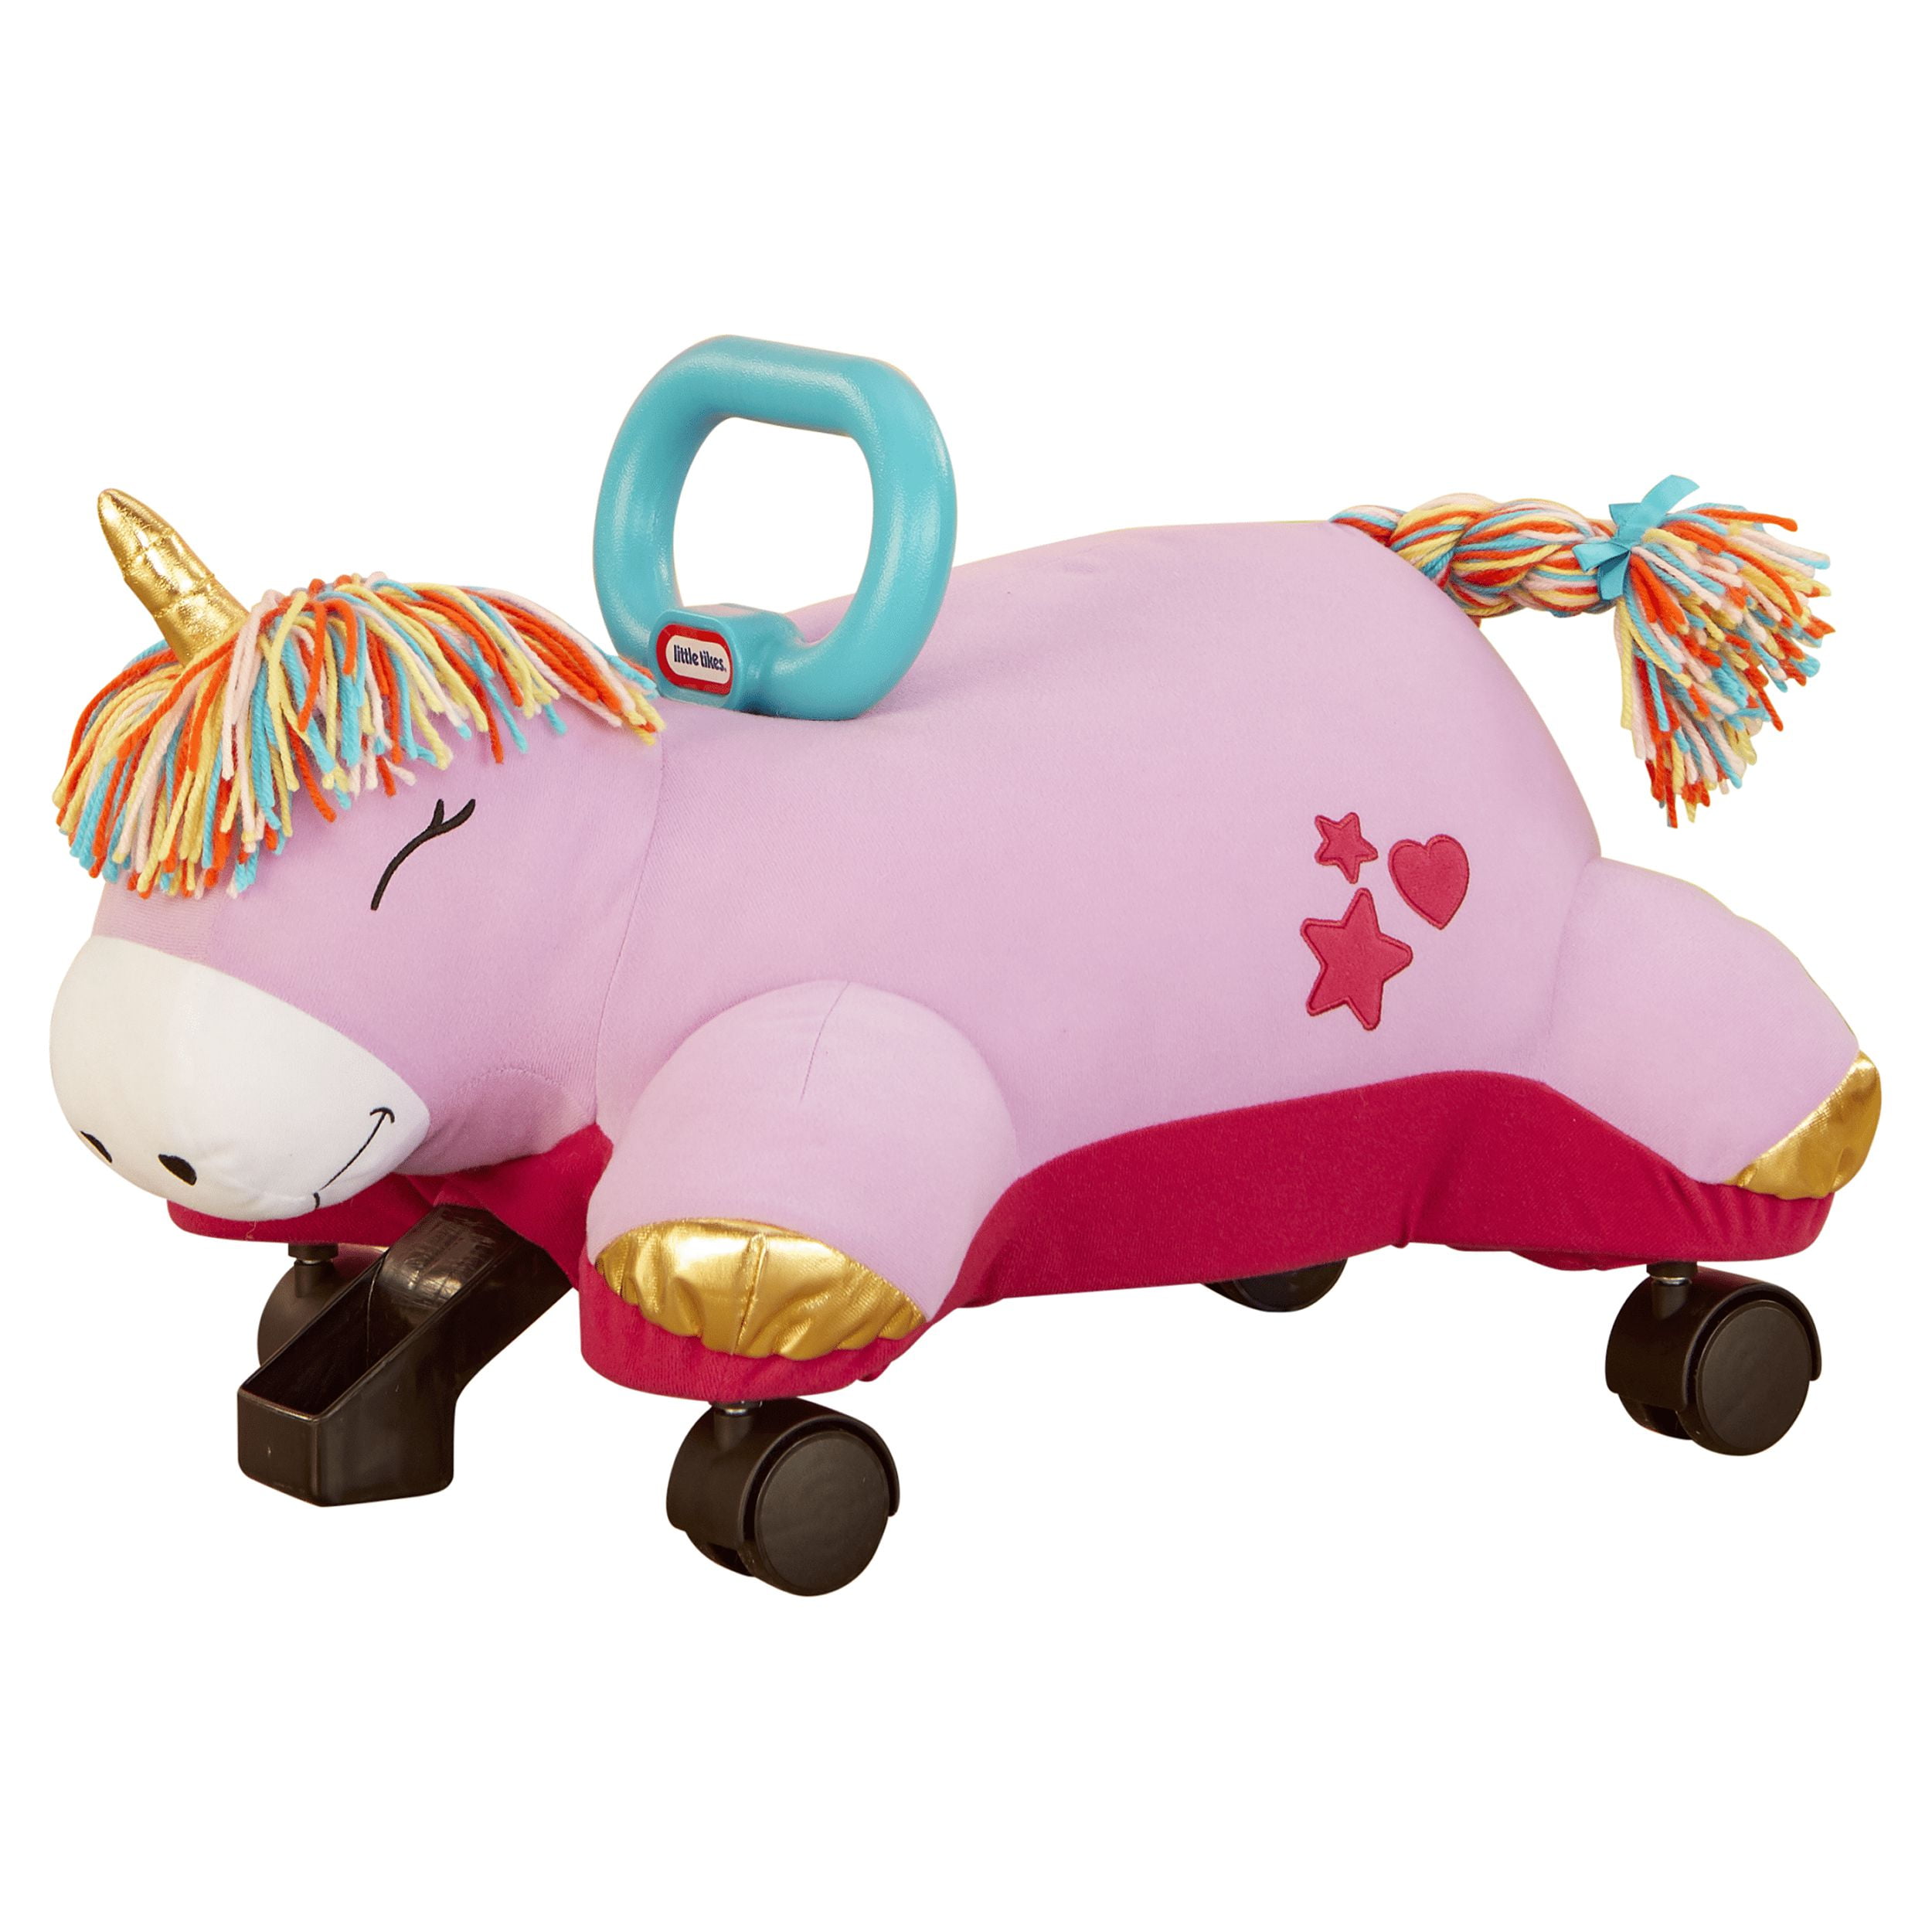 Little Tikes Unicorn Pillow Racer Plush Toddler Ride-on Toy - For Kids Boys  Girls Ages 18 Months to 3 Years Old - Walmart.com